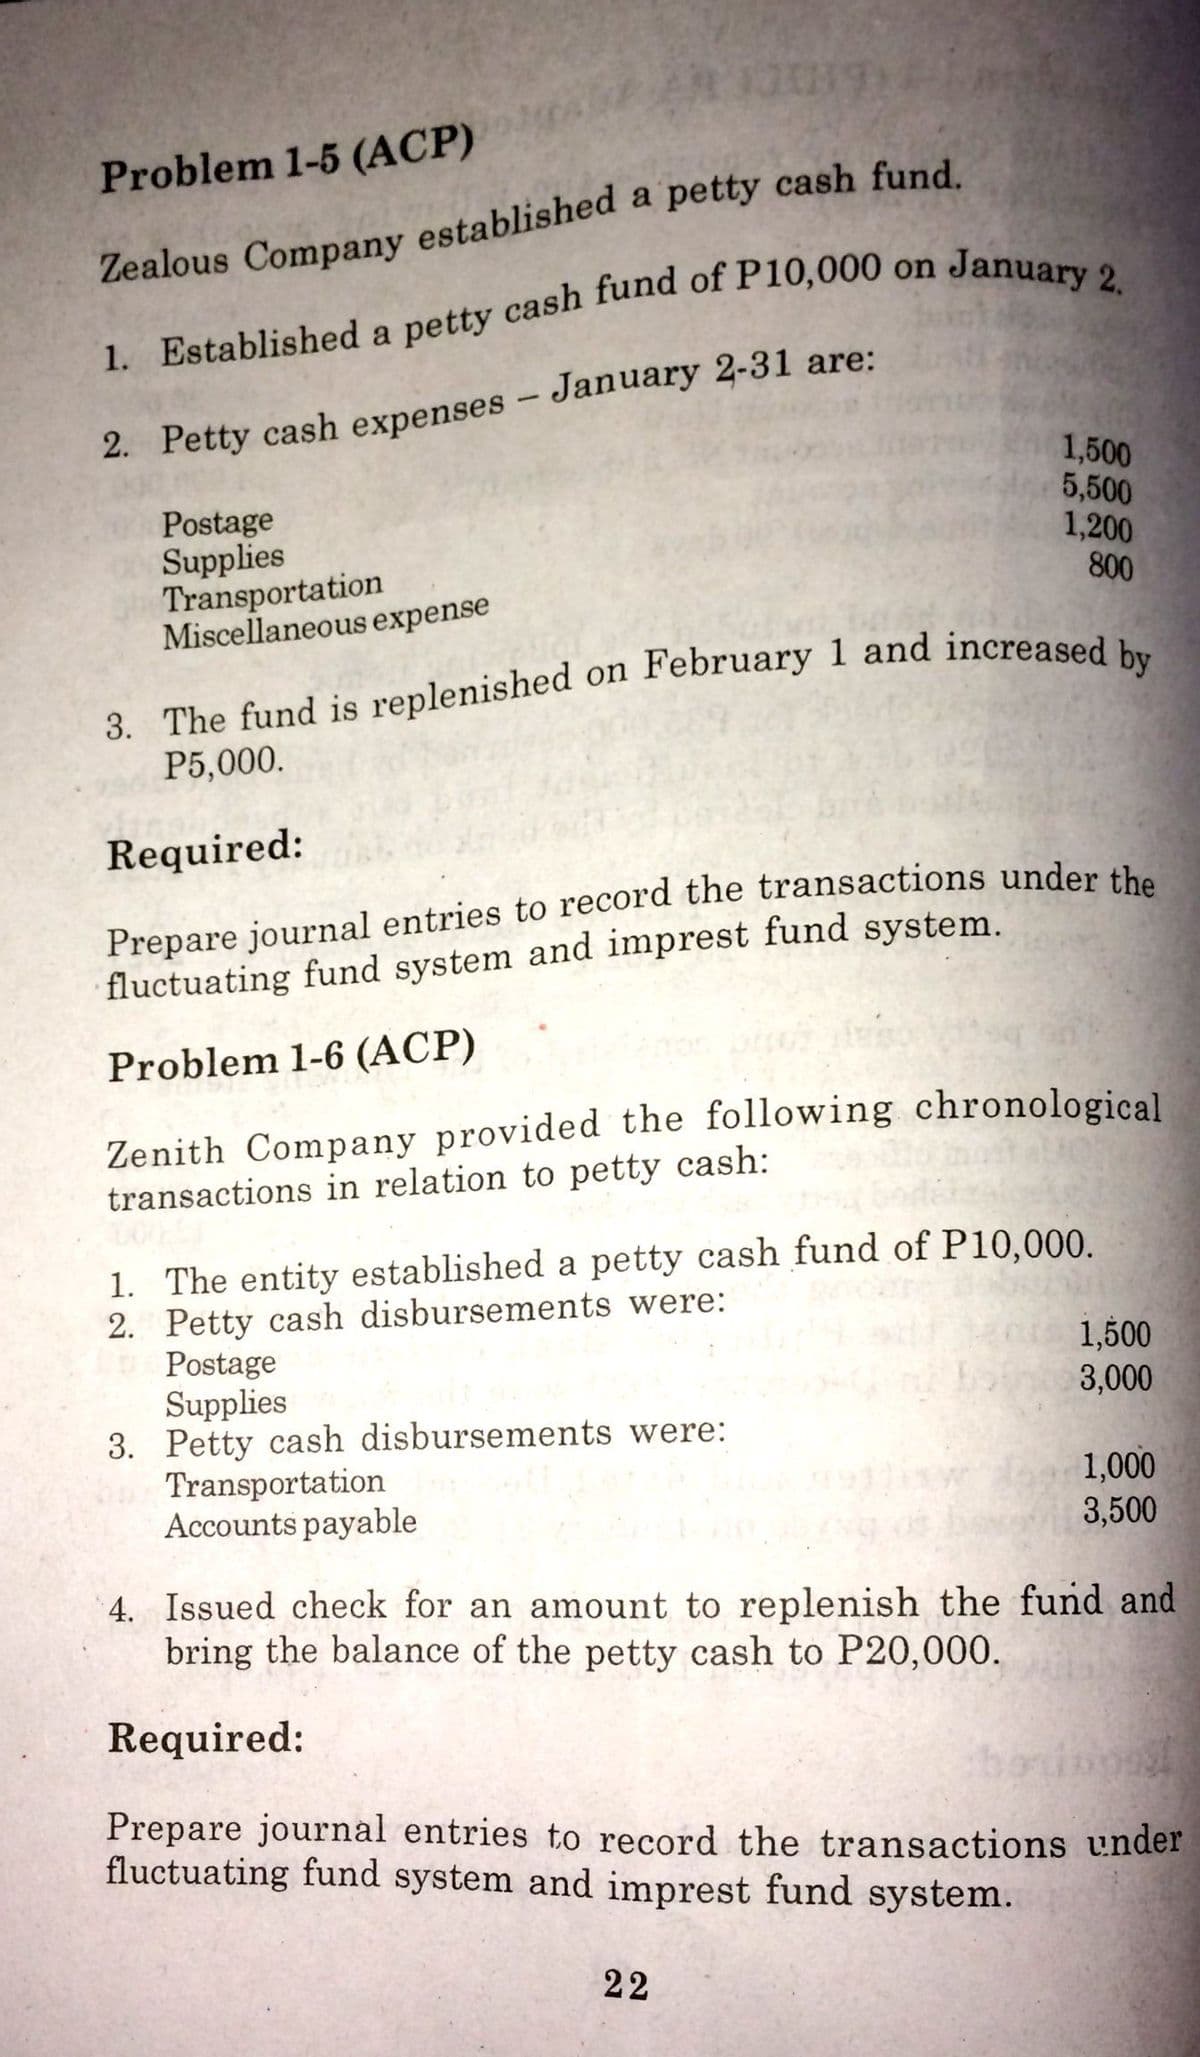 Problem 1-5 (ACP)
1. Established a petty cash fund of P10,000 on
2. Petty cash expenses – January 2-31 are:
Postage
Supplies
Transportation
Miscellaneous expense
1,500
5,500
1,200
800
3. The fund is replenished on February 1 and increased
P5,000.
Required:
Prepare journal entries to record the transactions under the
fluctuating fund system and imprest fund system.
Problem 1-6 (ACP)
Zenith Company provided the following chronological
transactions in relation to petty cash:
1. The entity established a petty cash fund of P10,000.
2. Petty cash disbursements were:
Postage
Supplies
3. Petty cash disbursements were:
Transportation
Accounts payable
1,500
3,000
1,000
3,500
4. Issued check for an amount to replenish the fund and
bring the balance of the petty cash to P20,000.
Required:
Prepare journal entries to record the transactions under
fluctuating fund system and imprest fund system.
22
